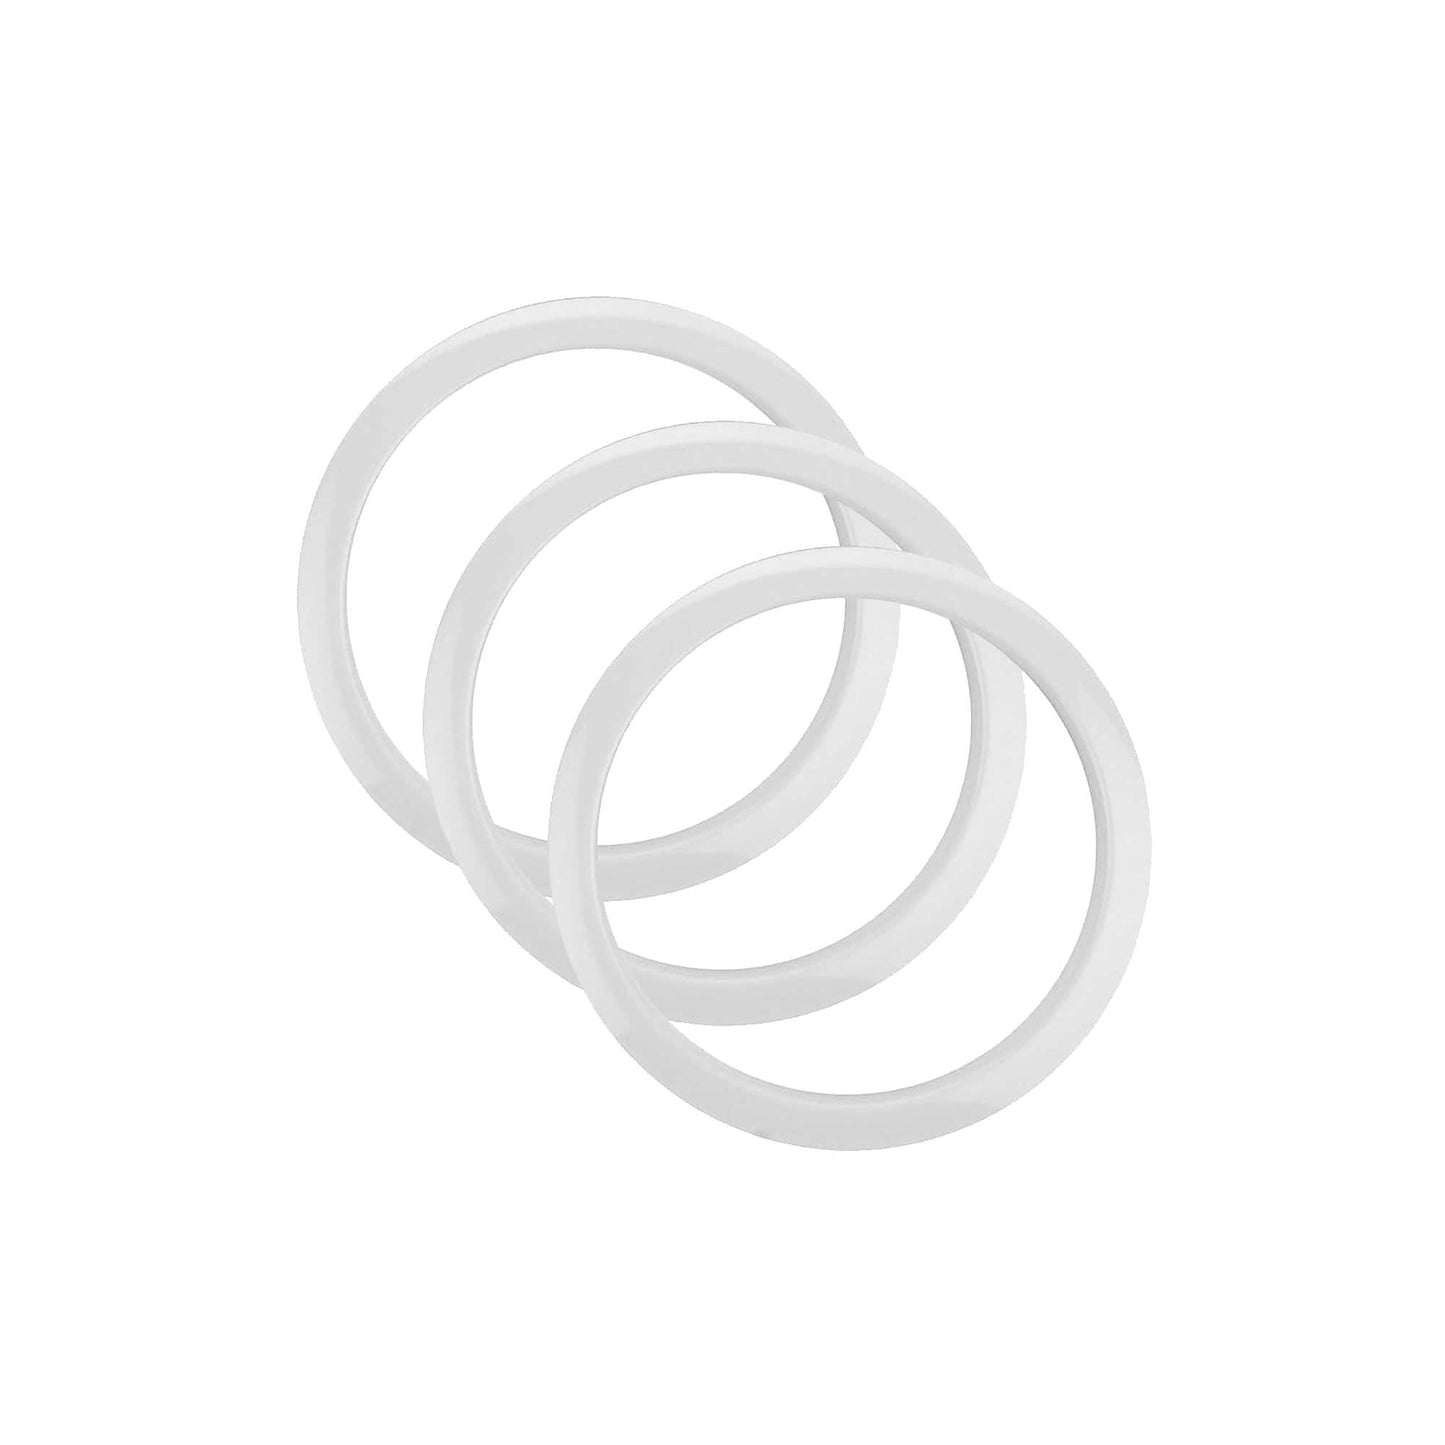 Bass Drum O's 6" Bass Drum Head Reinforcement Ring White (3 Pack Bundle) Drums and Percussion / Parts and Accessories / Drum Parts